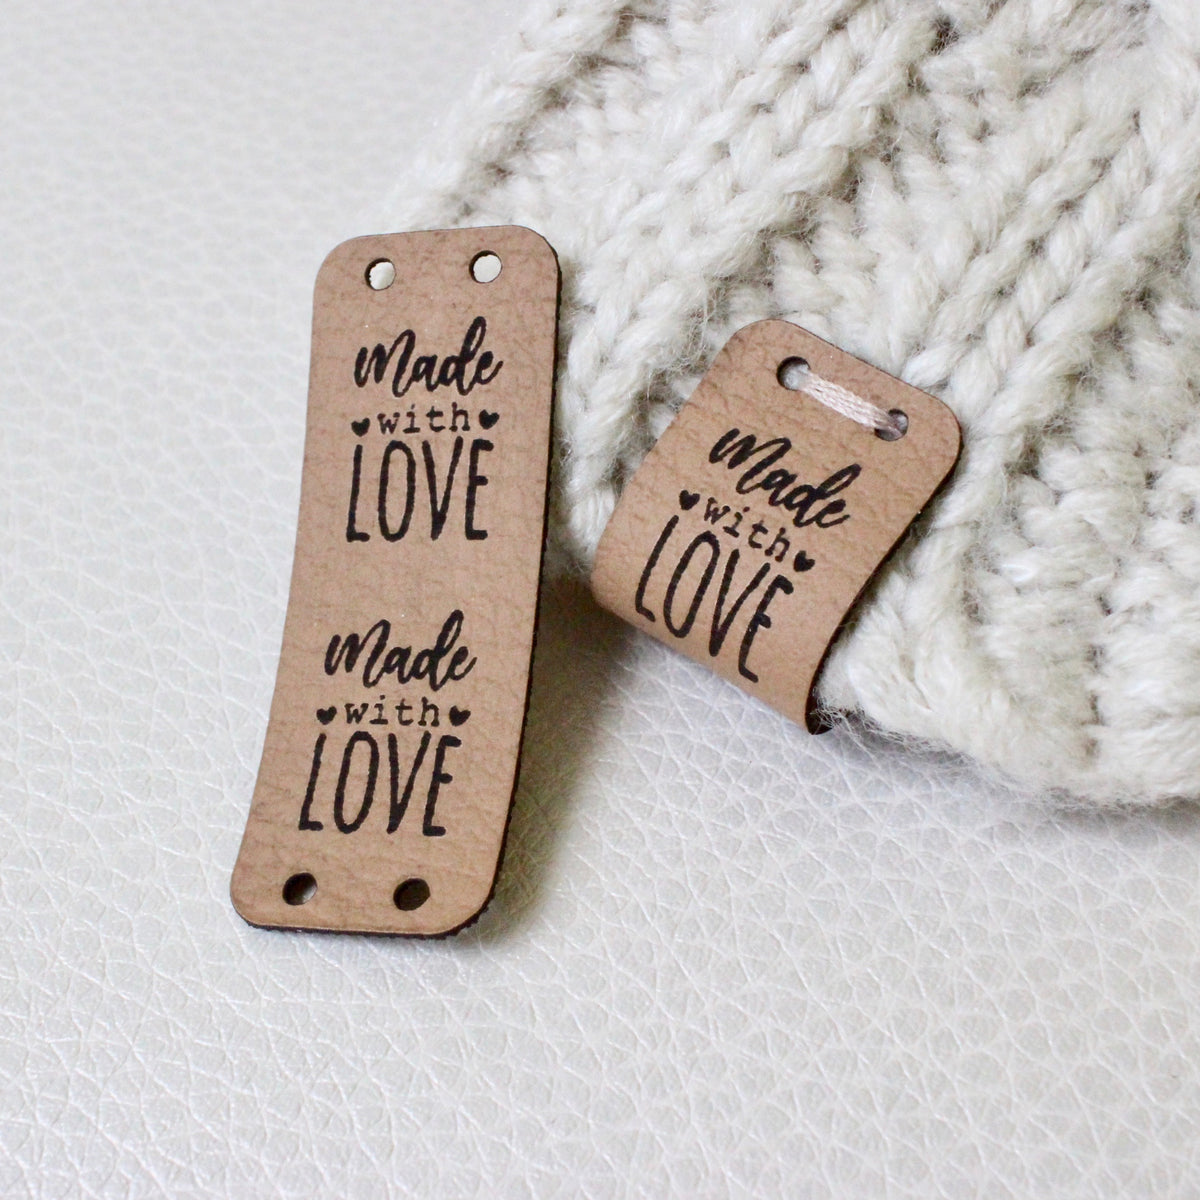 Handmade Label Tag Sewing, Label Leather Made Love